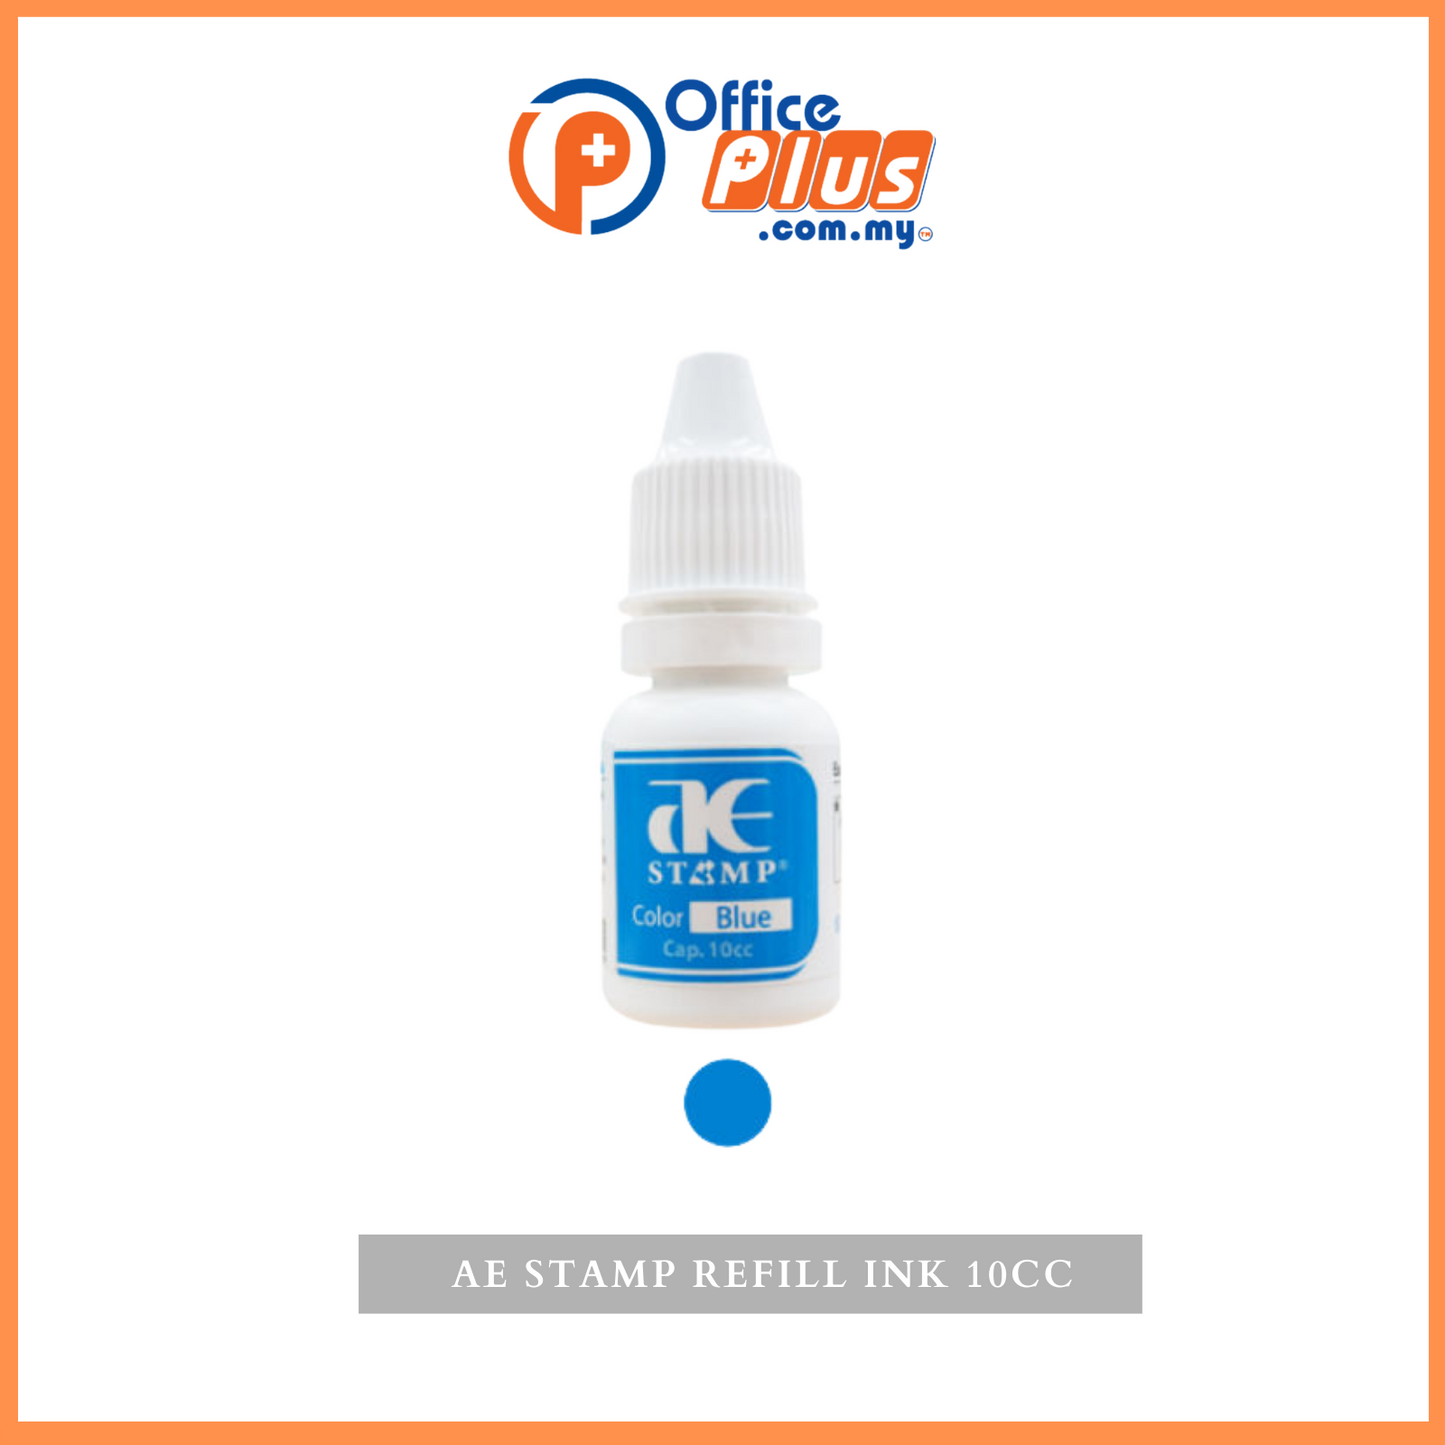 AE Stamp Refill Ink 10cc - OfficePlus